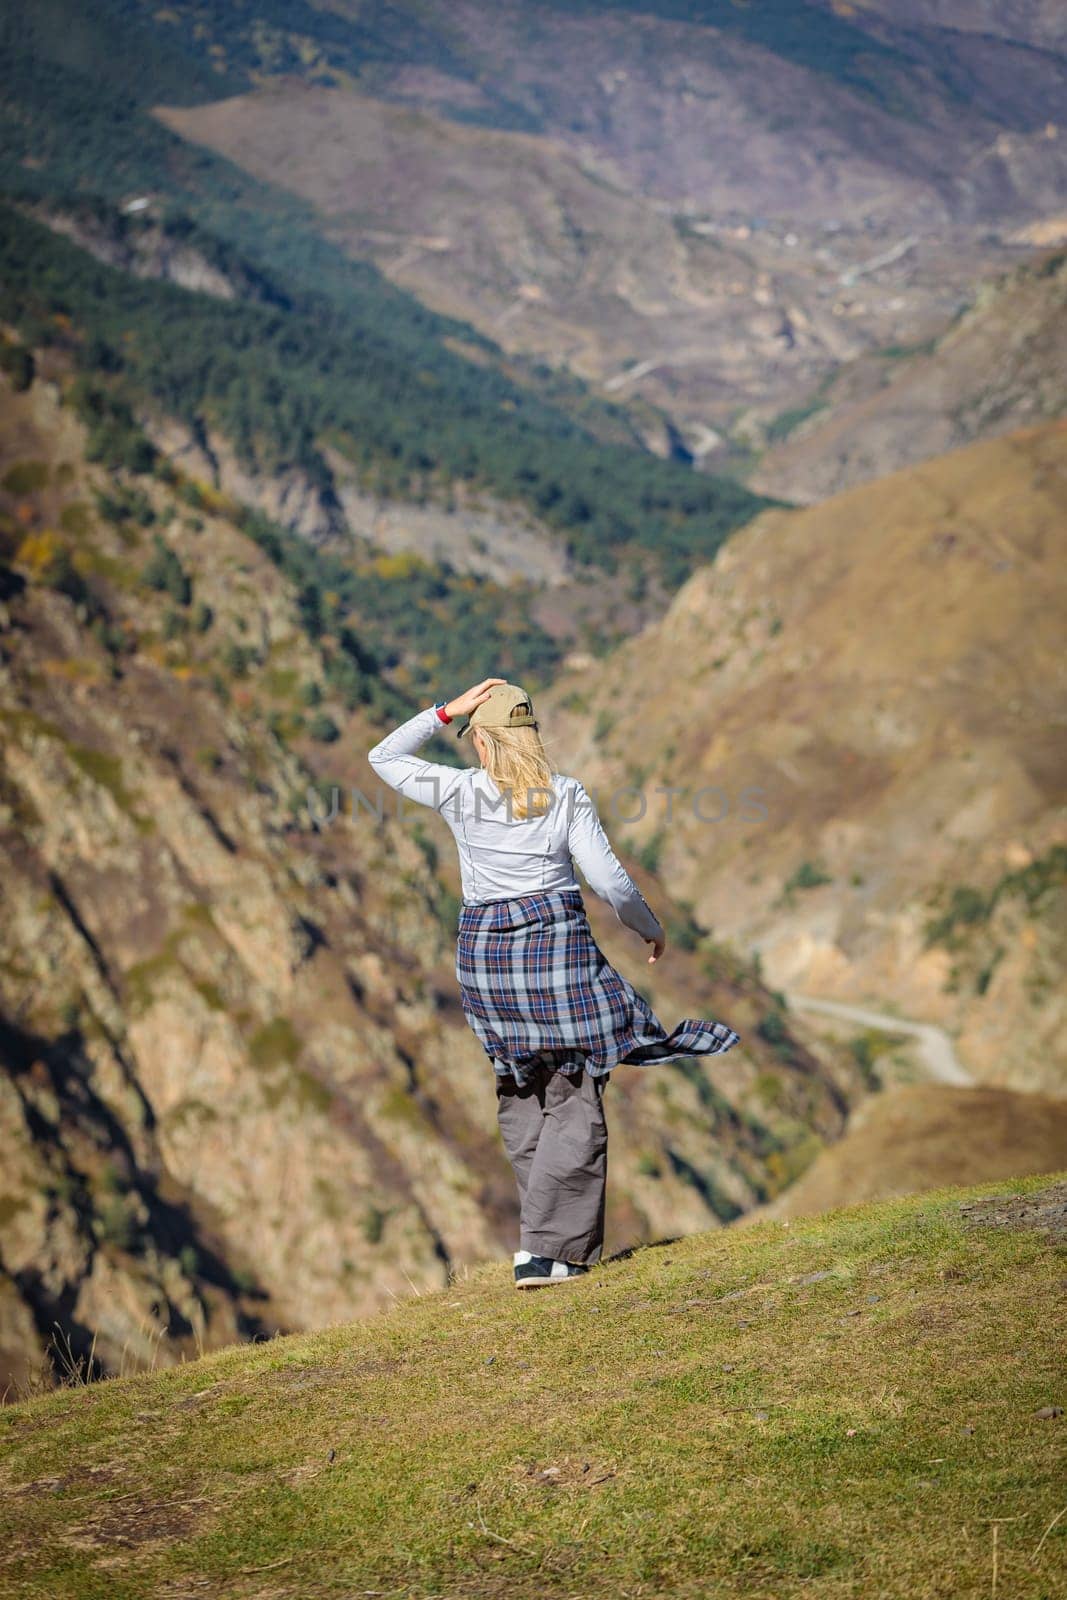 The girl admires the expanse of the mountains by Yurich32